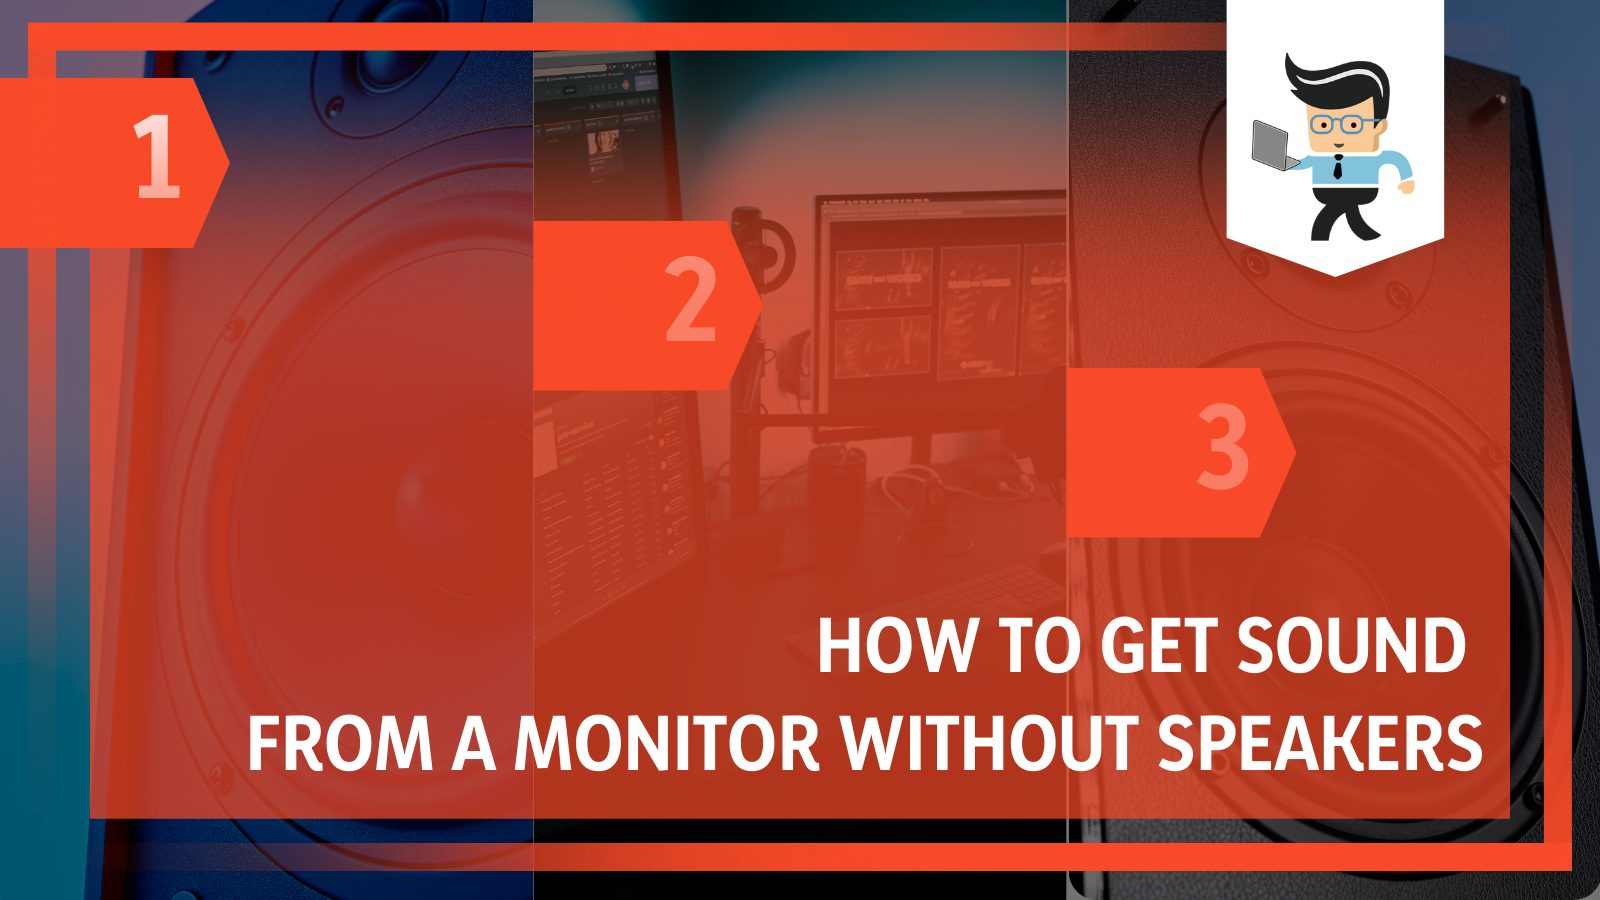 How To Get Sound From a Monitor Without Speaker